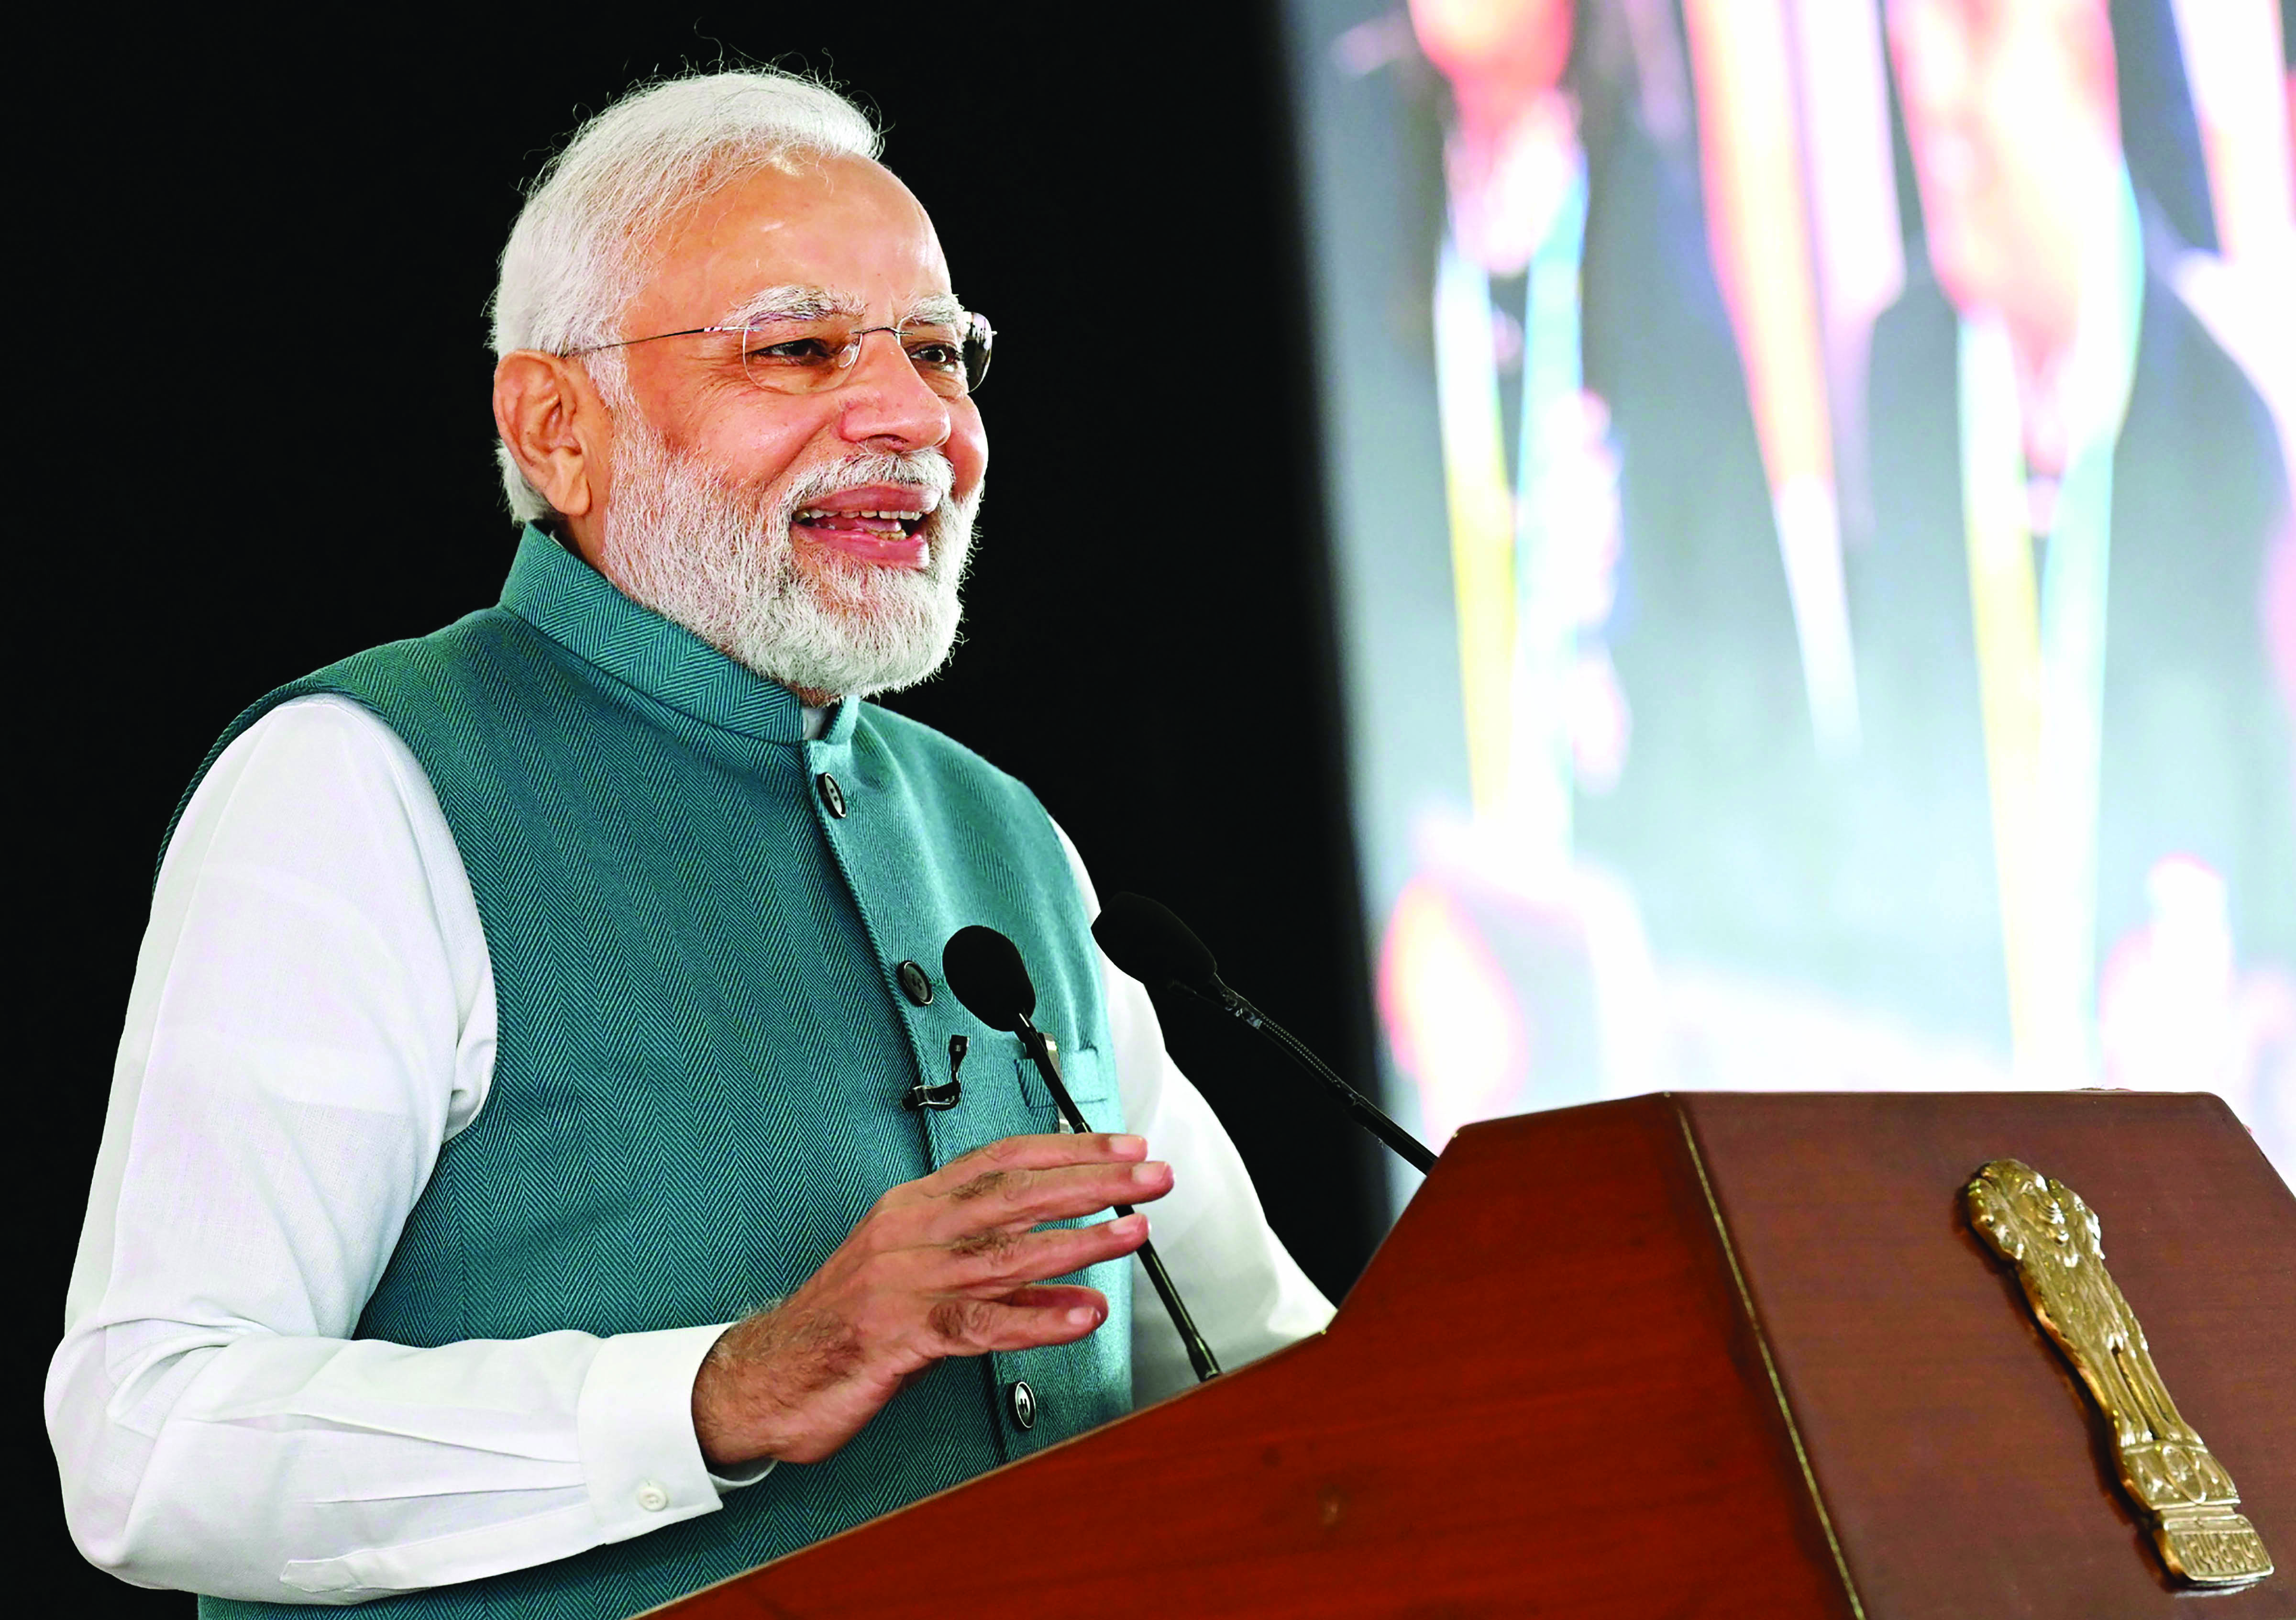 PM Modi to address his first rally in Srinagar today post-Article 370